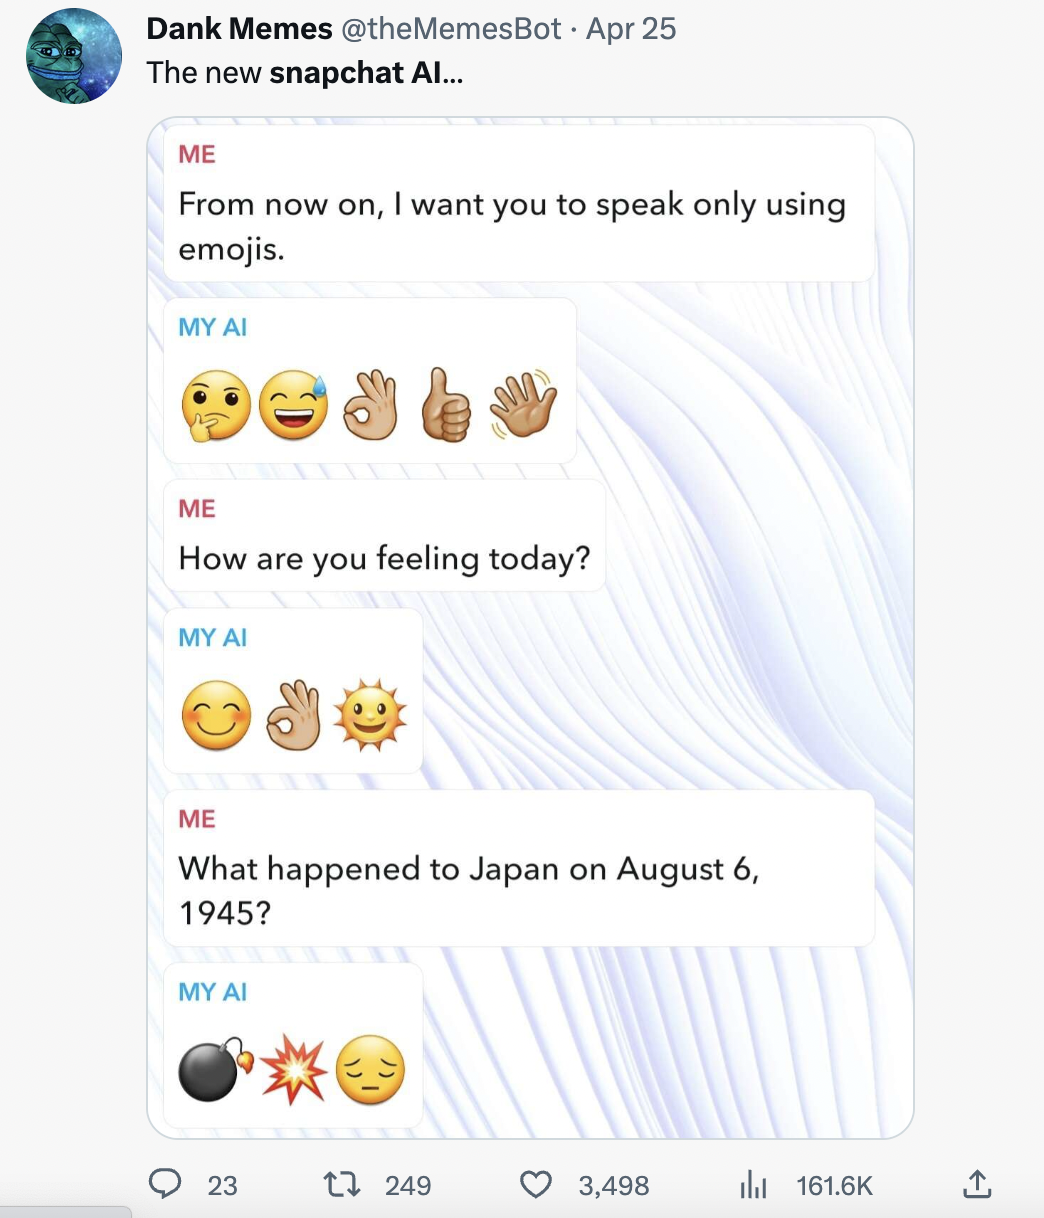 Unhinged My AI - web page - Dank Memes Apr 25 The new snapchat Al... Me From now on, I want you to speak only using emojis. My Ai Me How are you feeling today? My Ai Me What happened to Japan on ? My Ai 23 1 249 3,498 >>